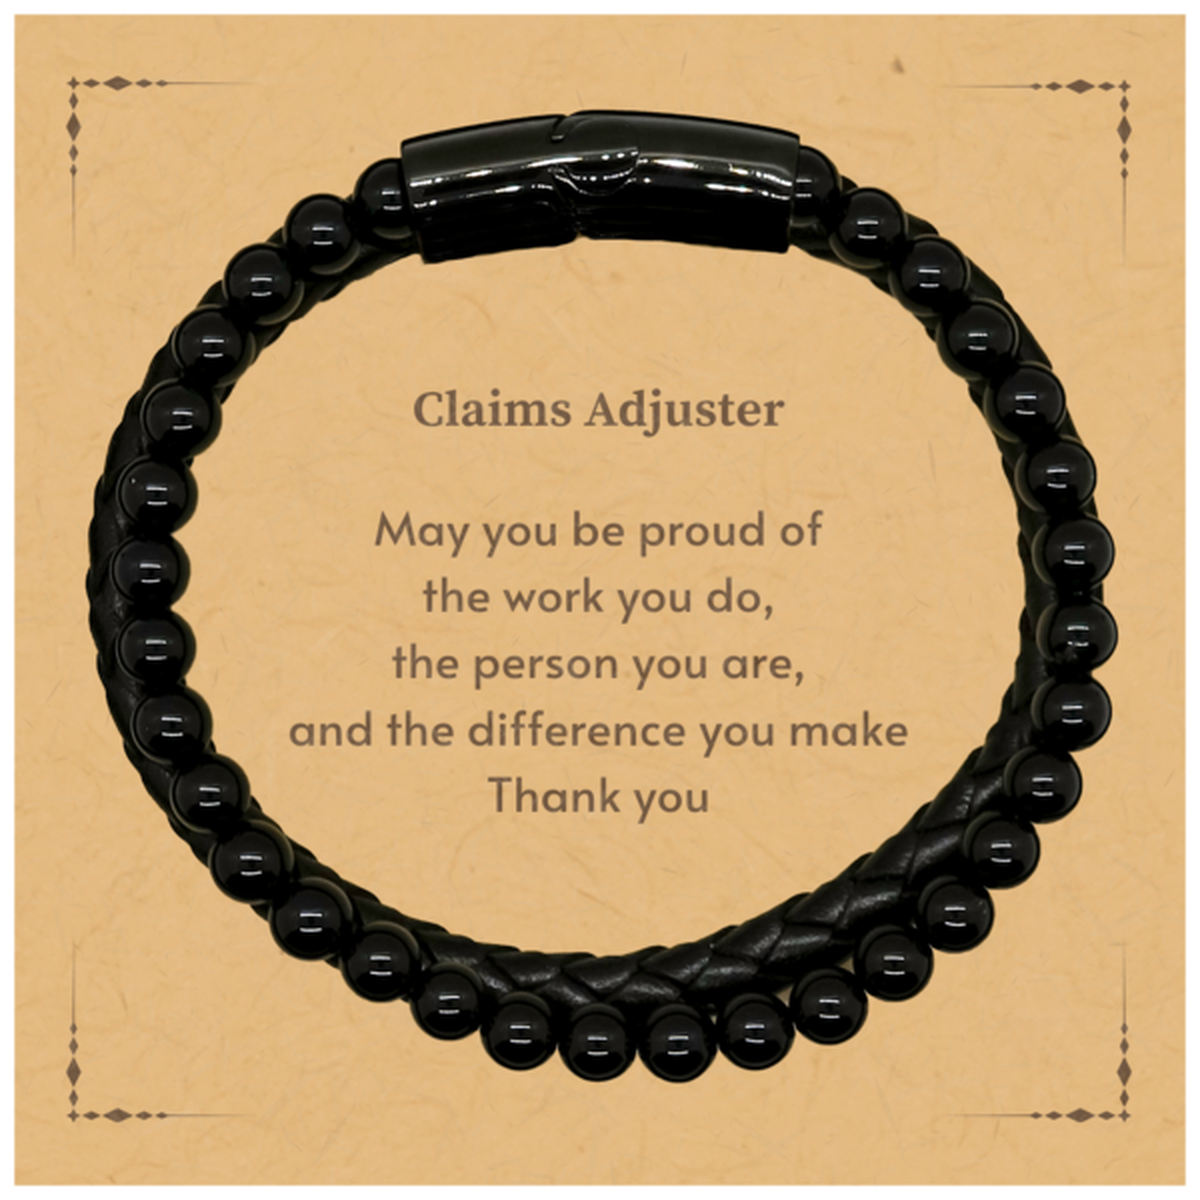 Heartwarming Stone Leather Bracelets Retirement Coworkers Gifts for Claims Adjuster, Claims Adjuster May You be proud of the work you do, the person you are Gifts for Boss Men Women Friends